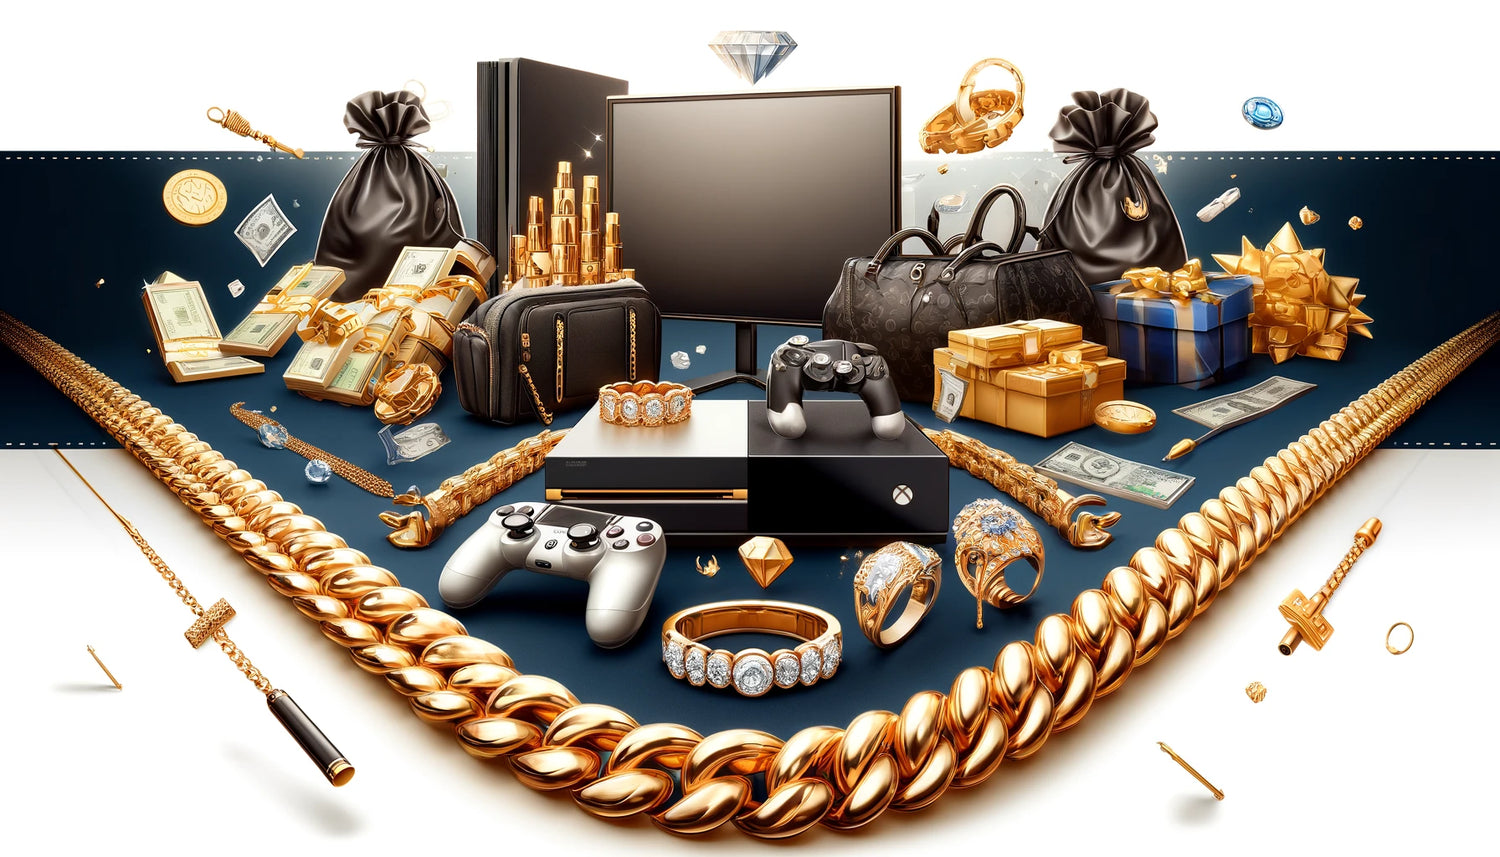 Picture of yellow gold chains, cash, electronics, rings, gifts, and handbags